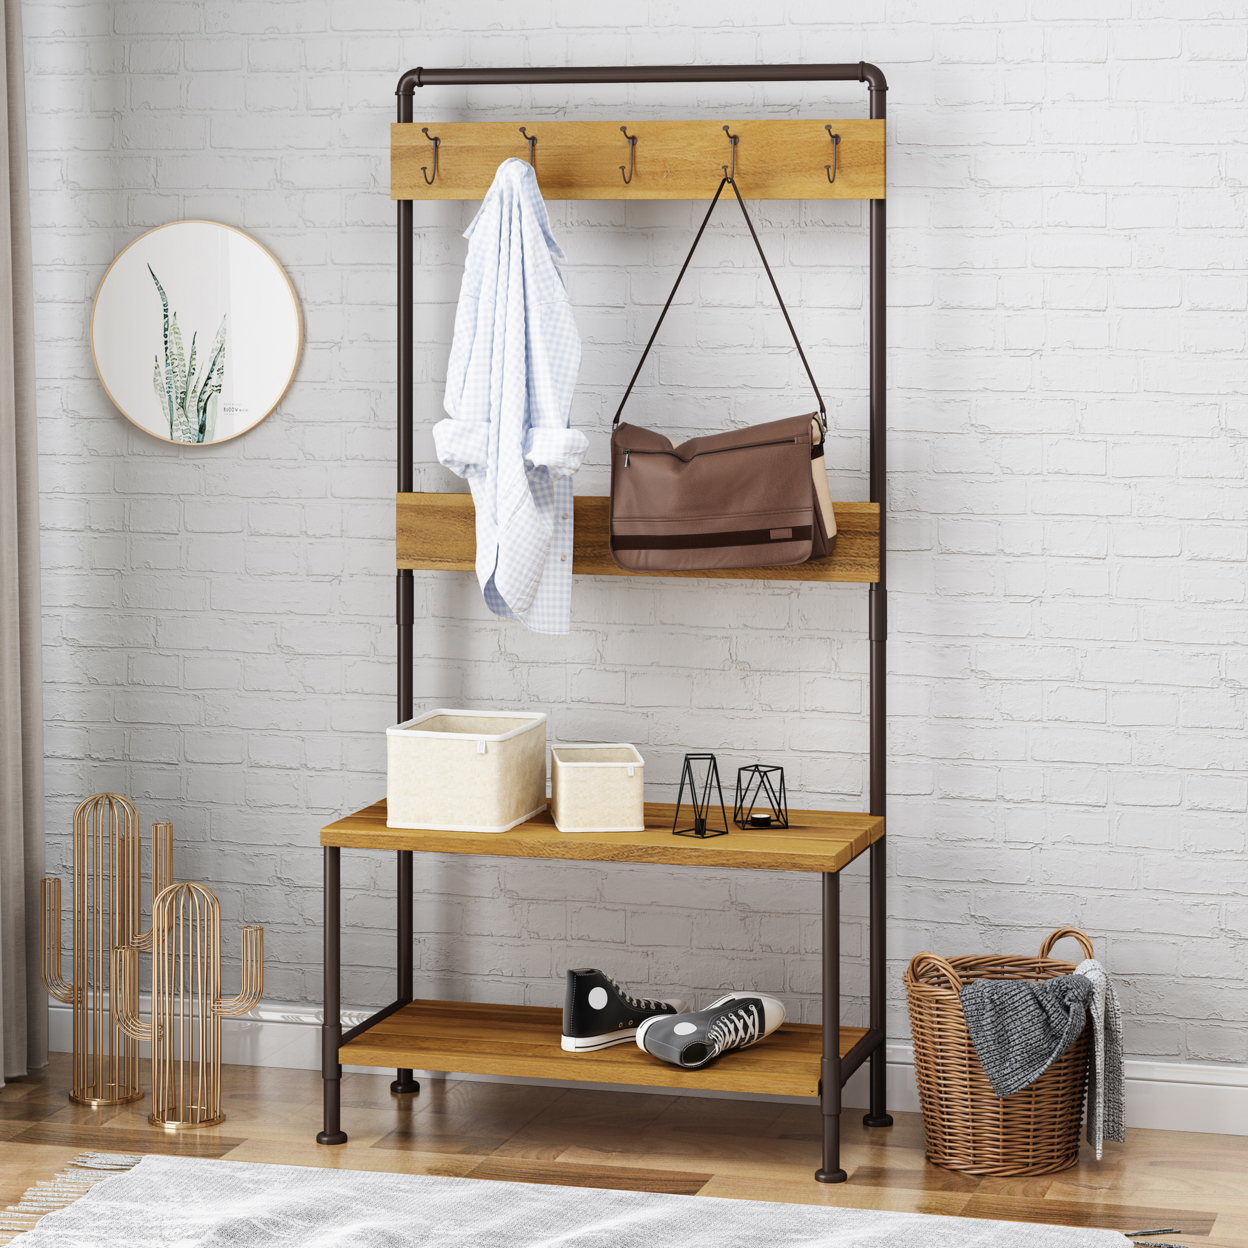 Kay Indoor Industrial Acacia Wood Bench With Shelf And Coat Hooks - Gray